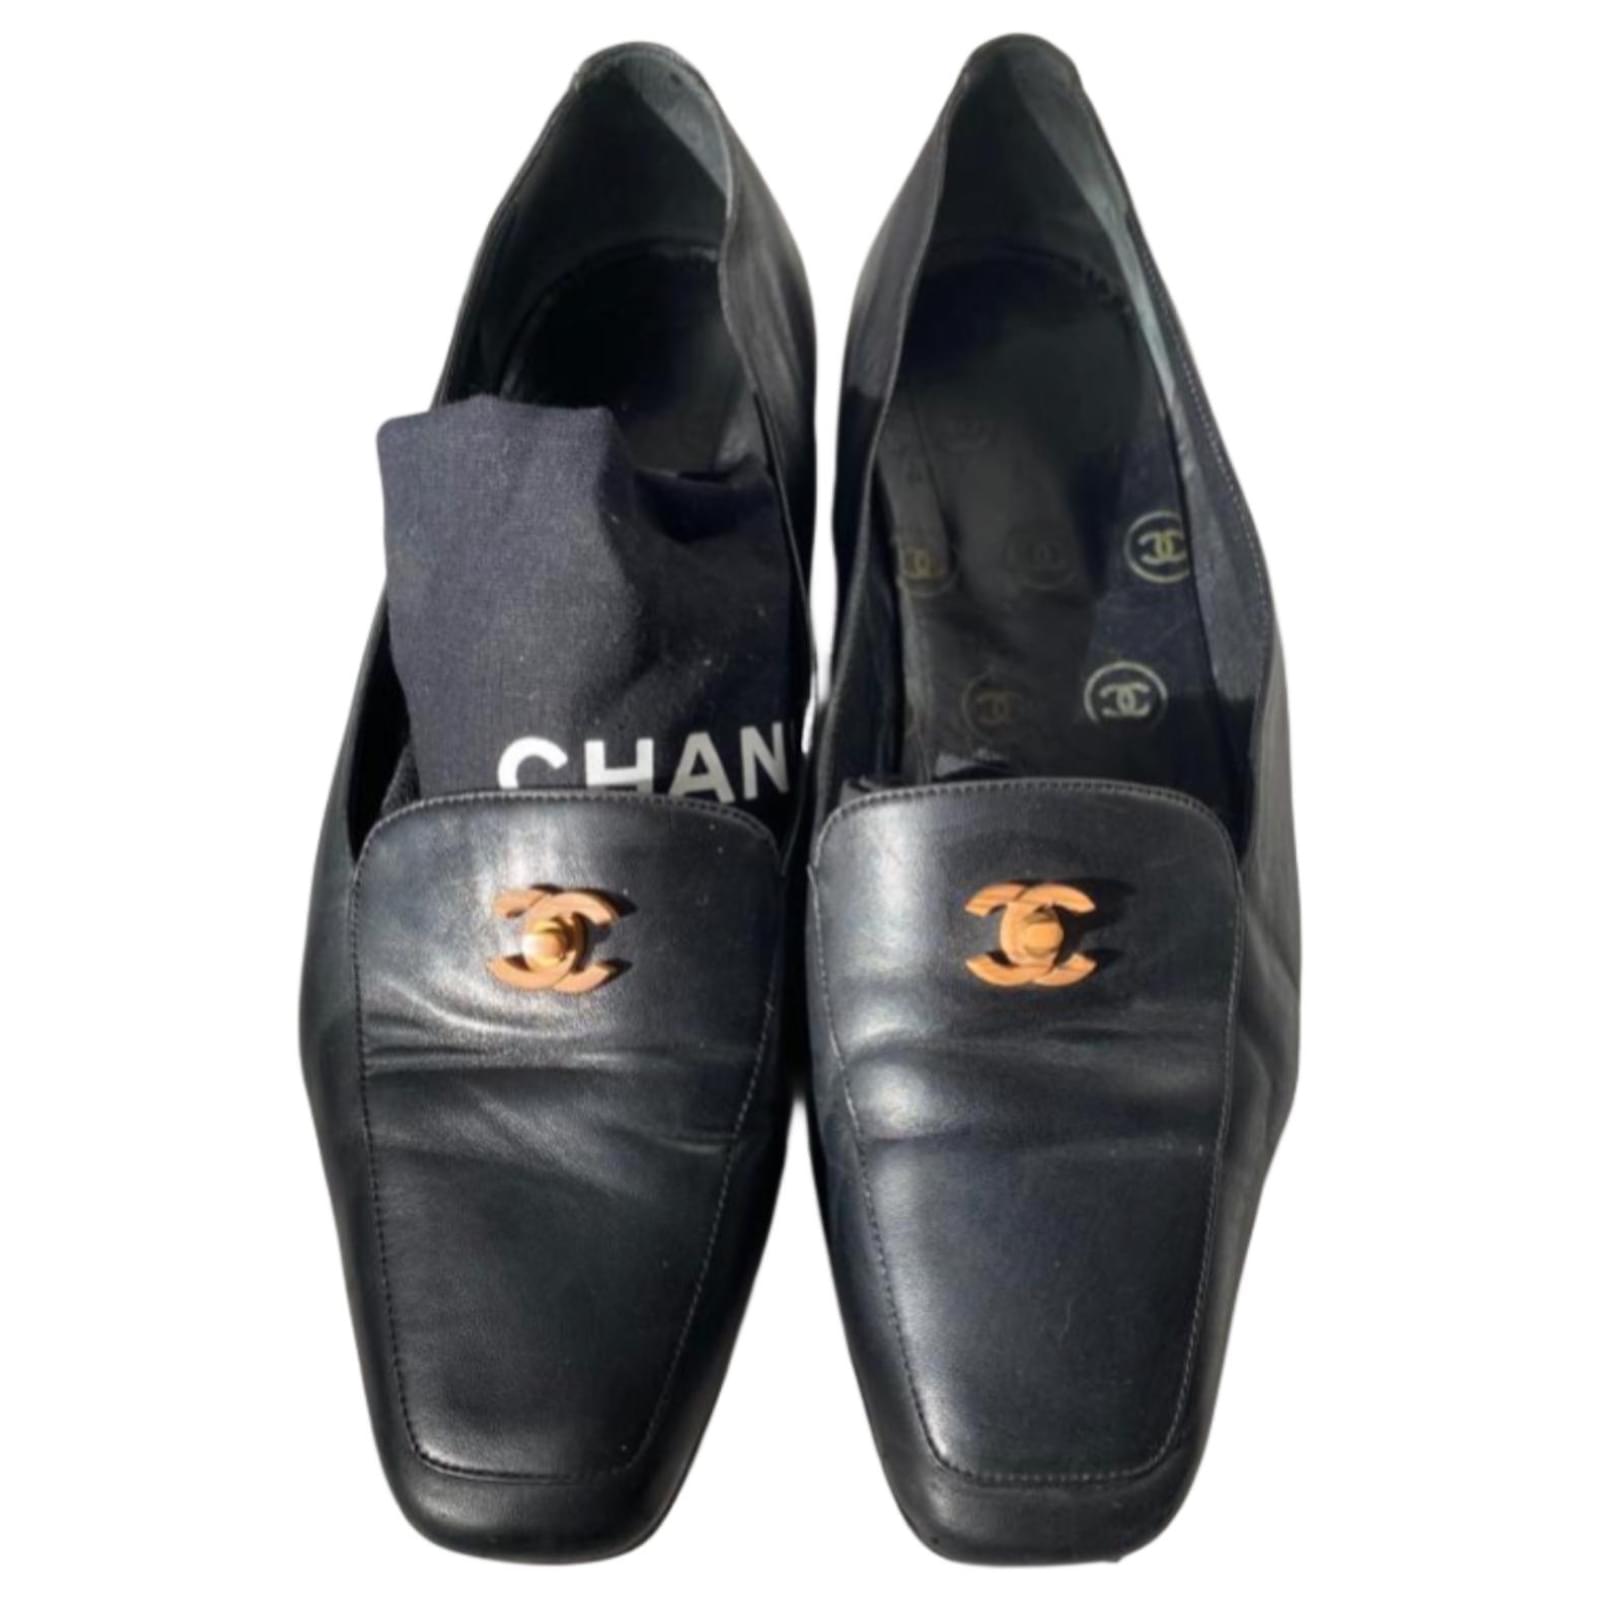 loafers chanel shoes 39